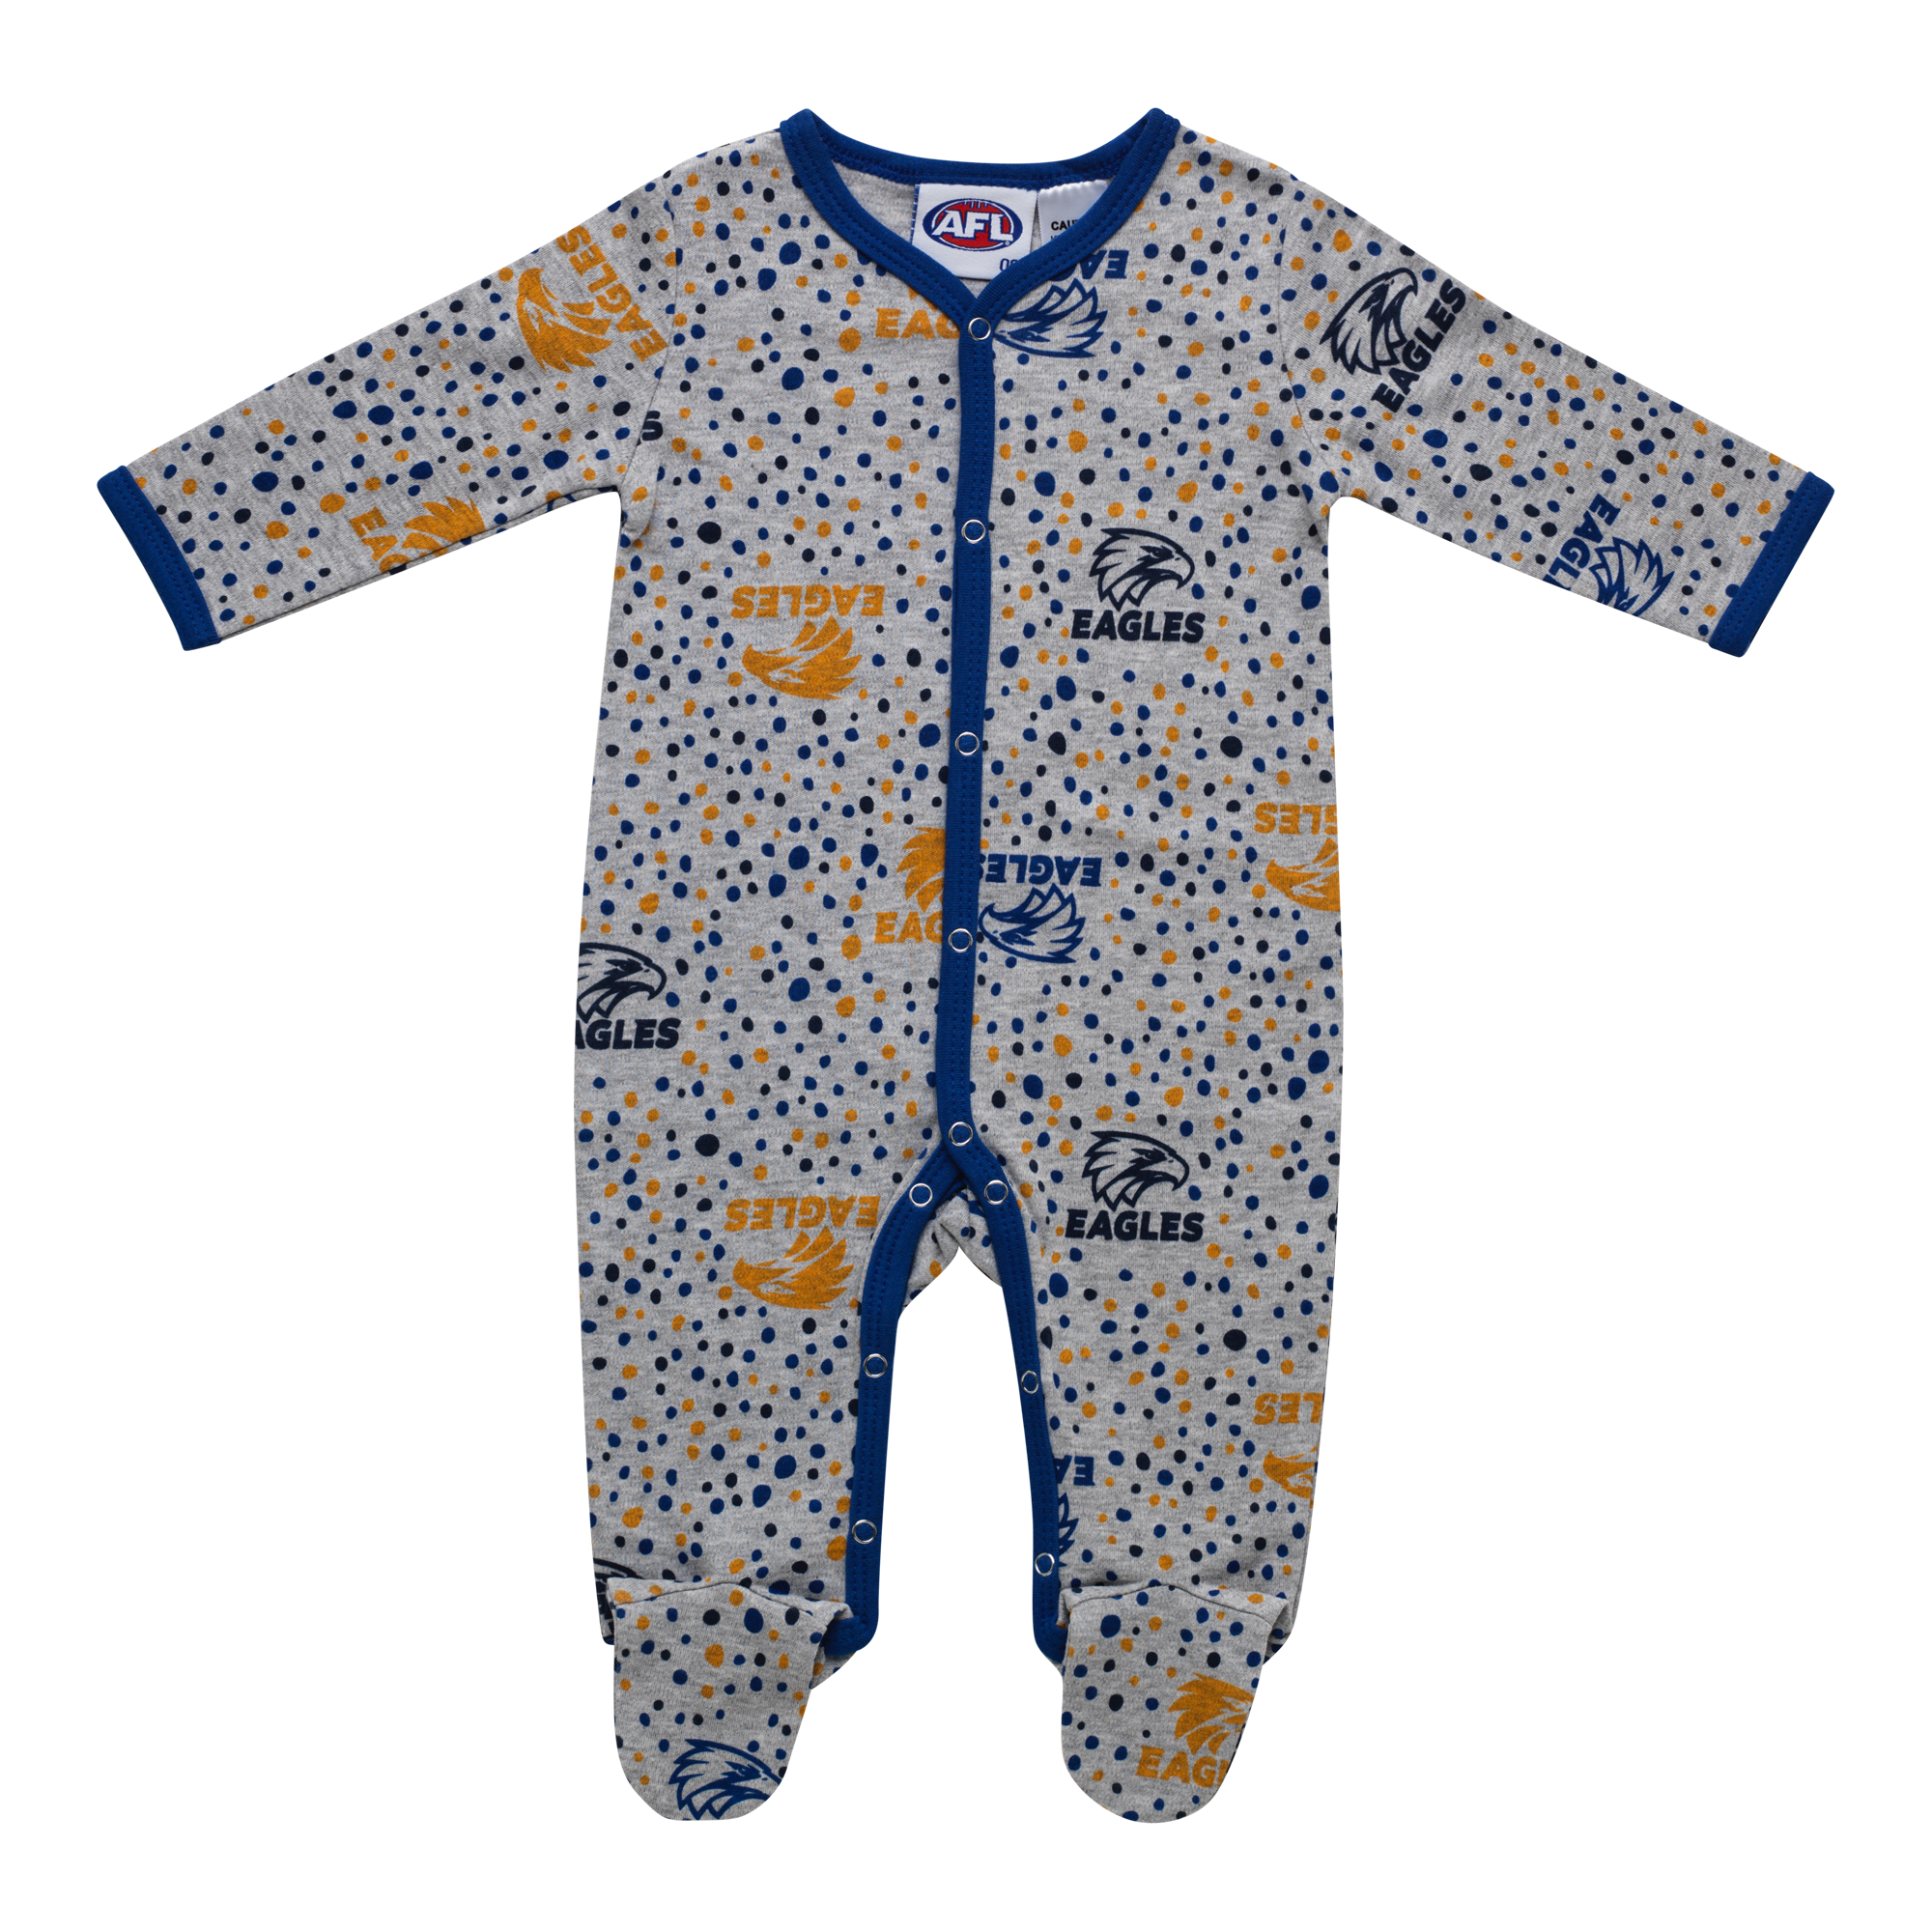 West Coast Eagles Baby Coverall